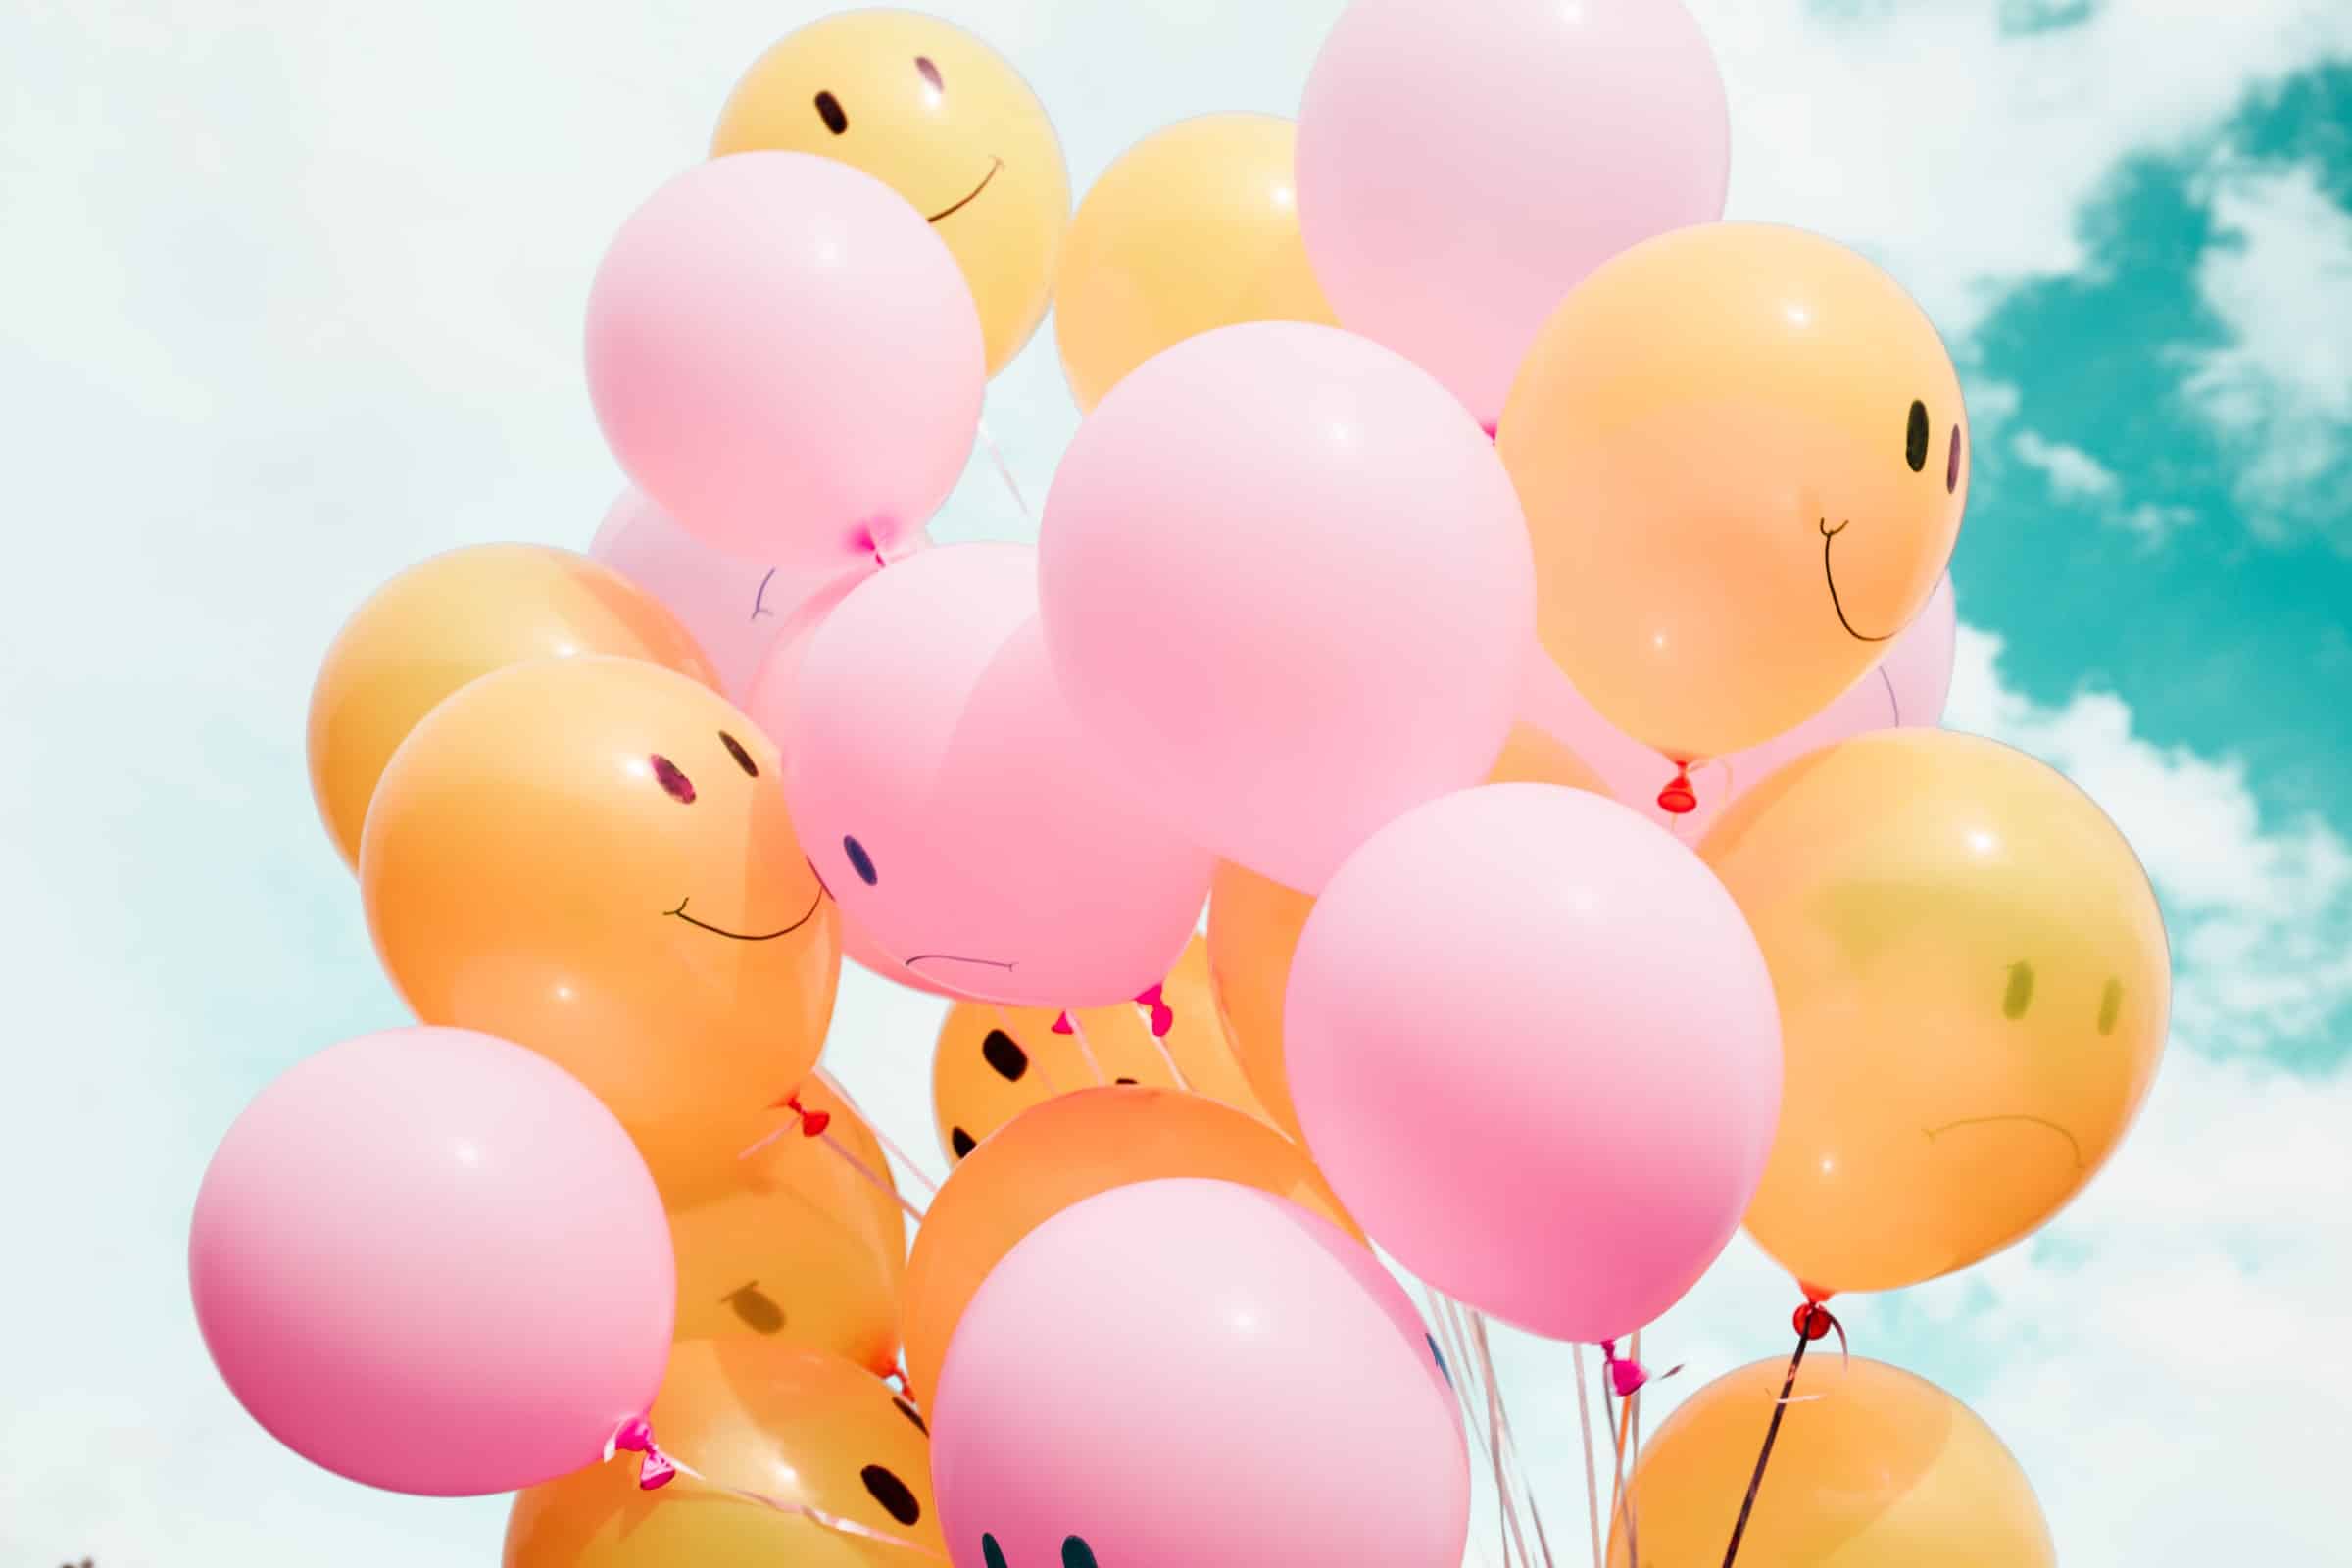 low angle photo of orange and pink balloons with printed with smiley and angry faces for buying cycle article